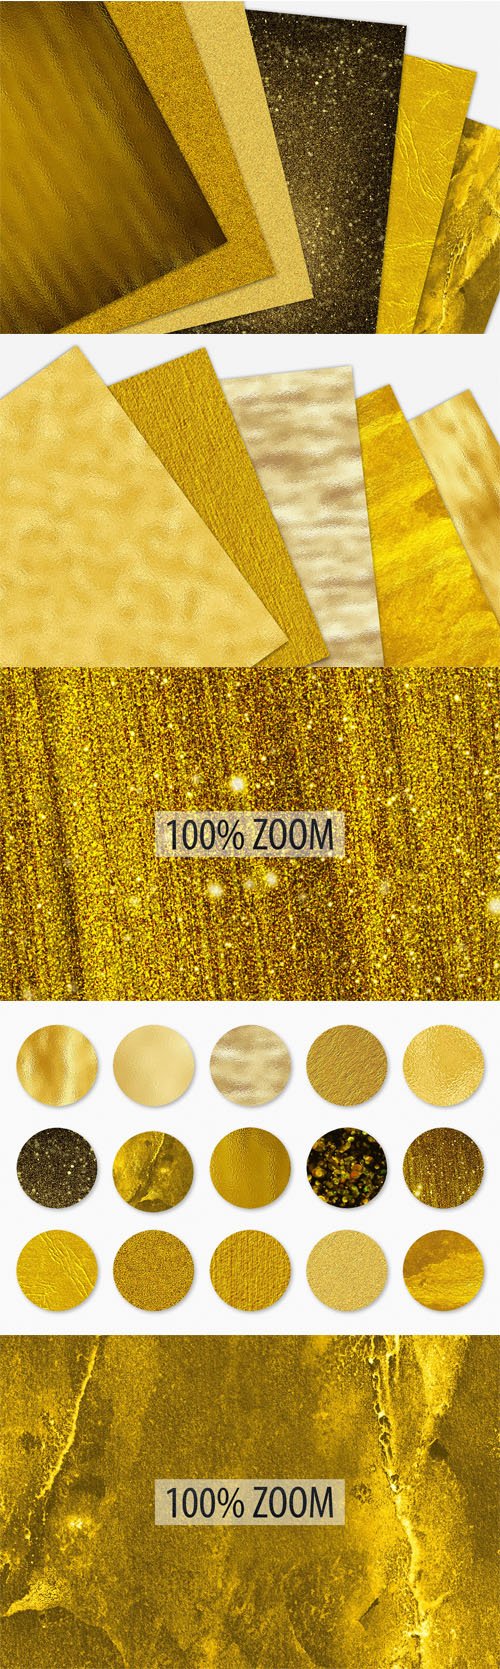 15 Gold and Glitter Textures Pack